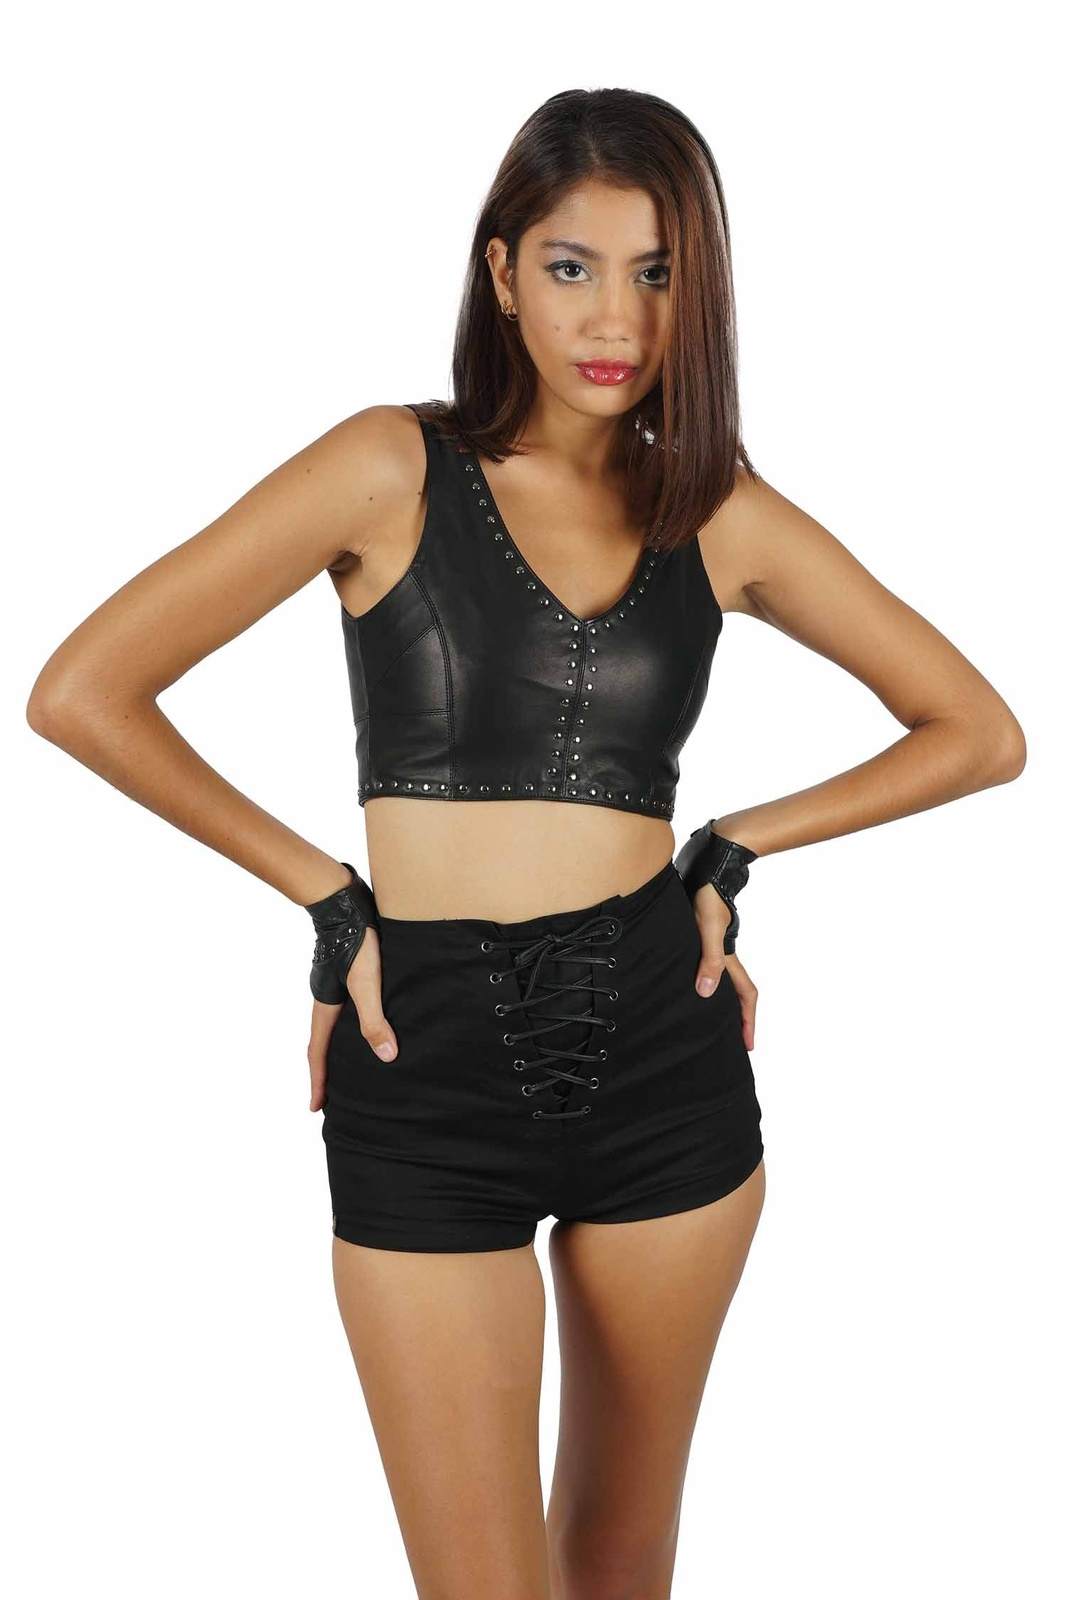 studded leather crop top from Love Khaos